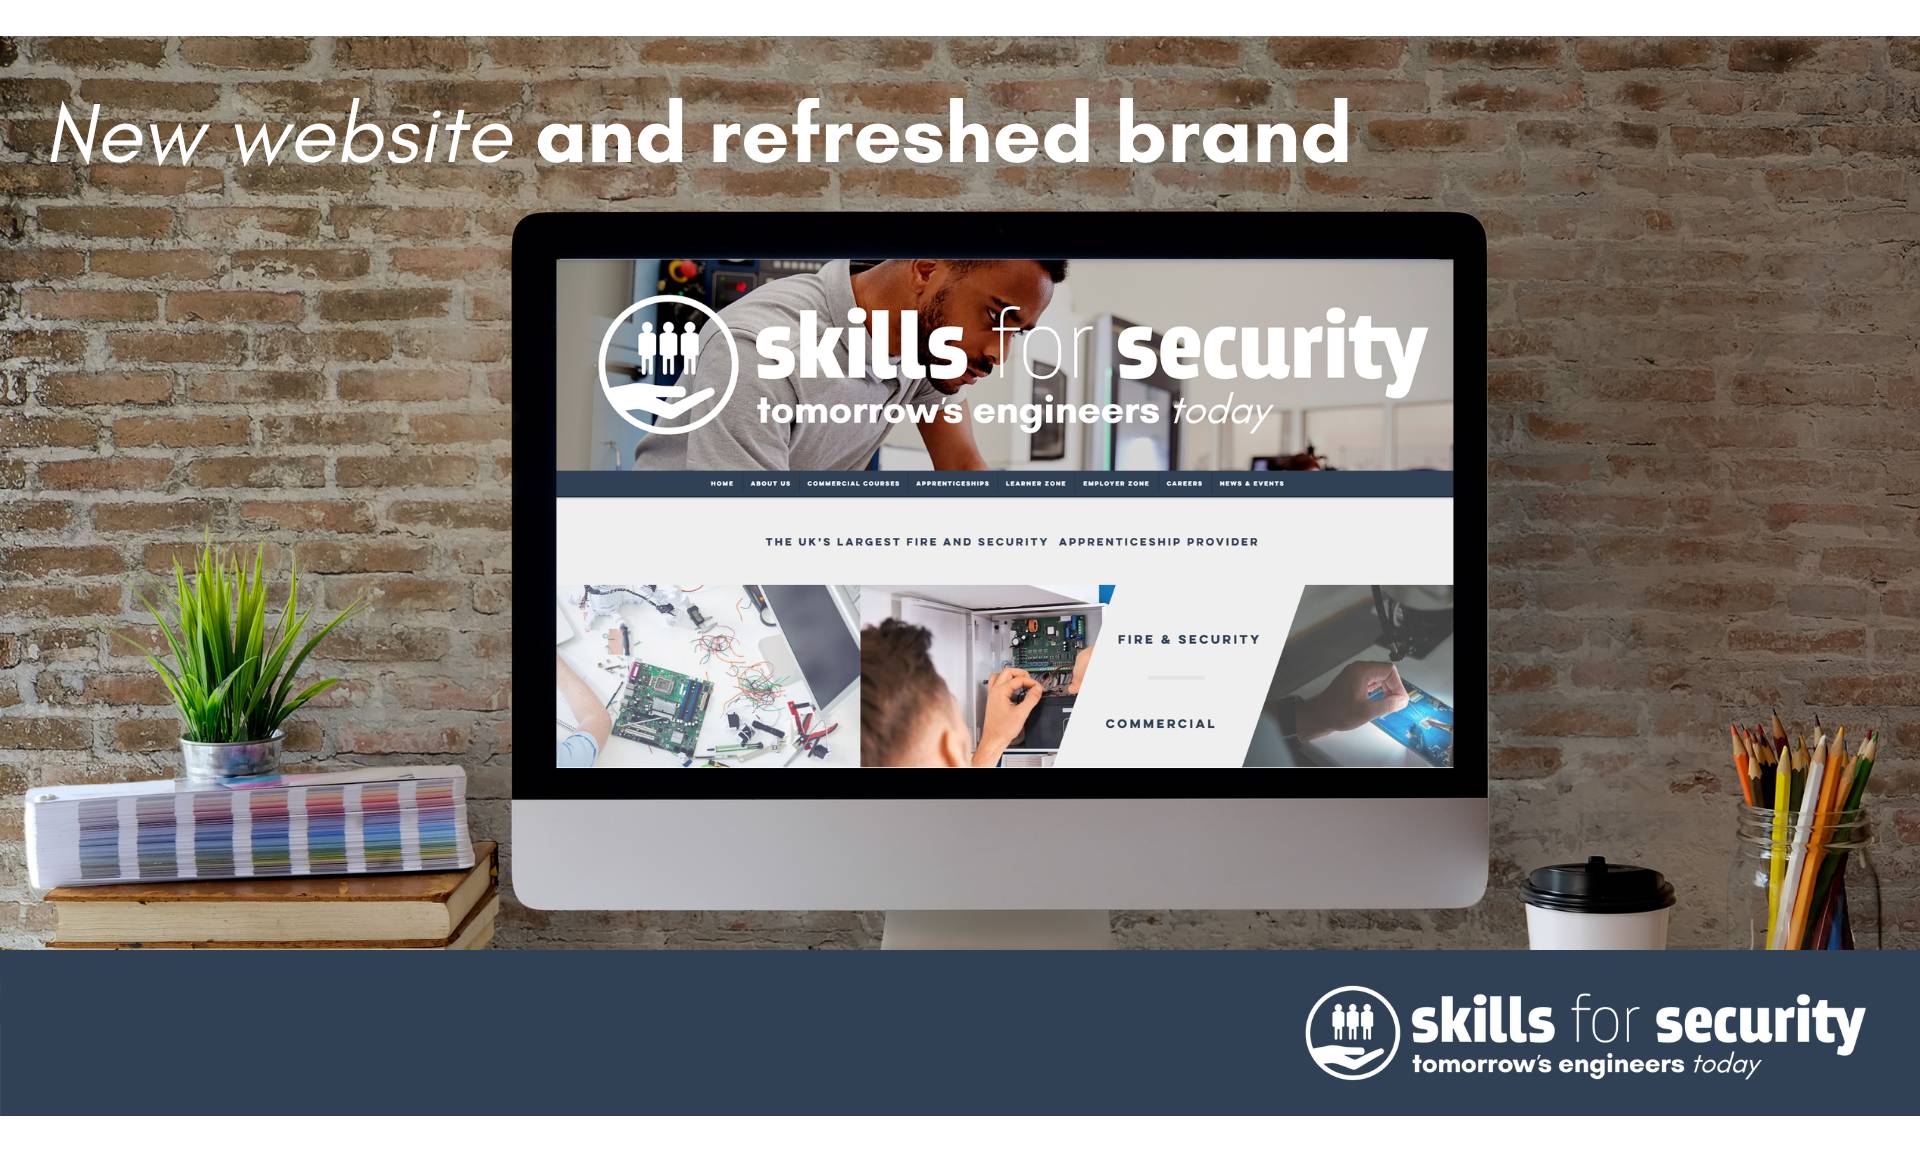 Skills for Security launch new improved website and refreshed brand identity